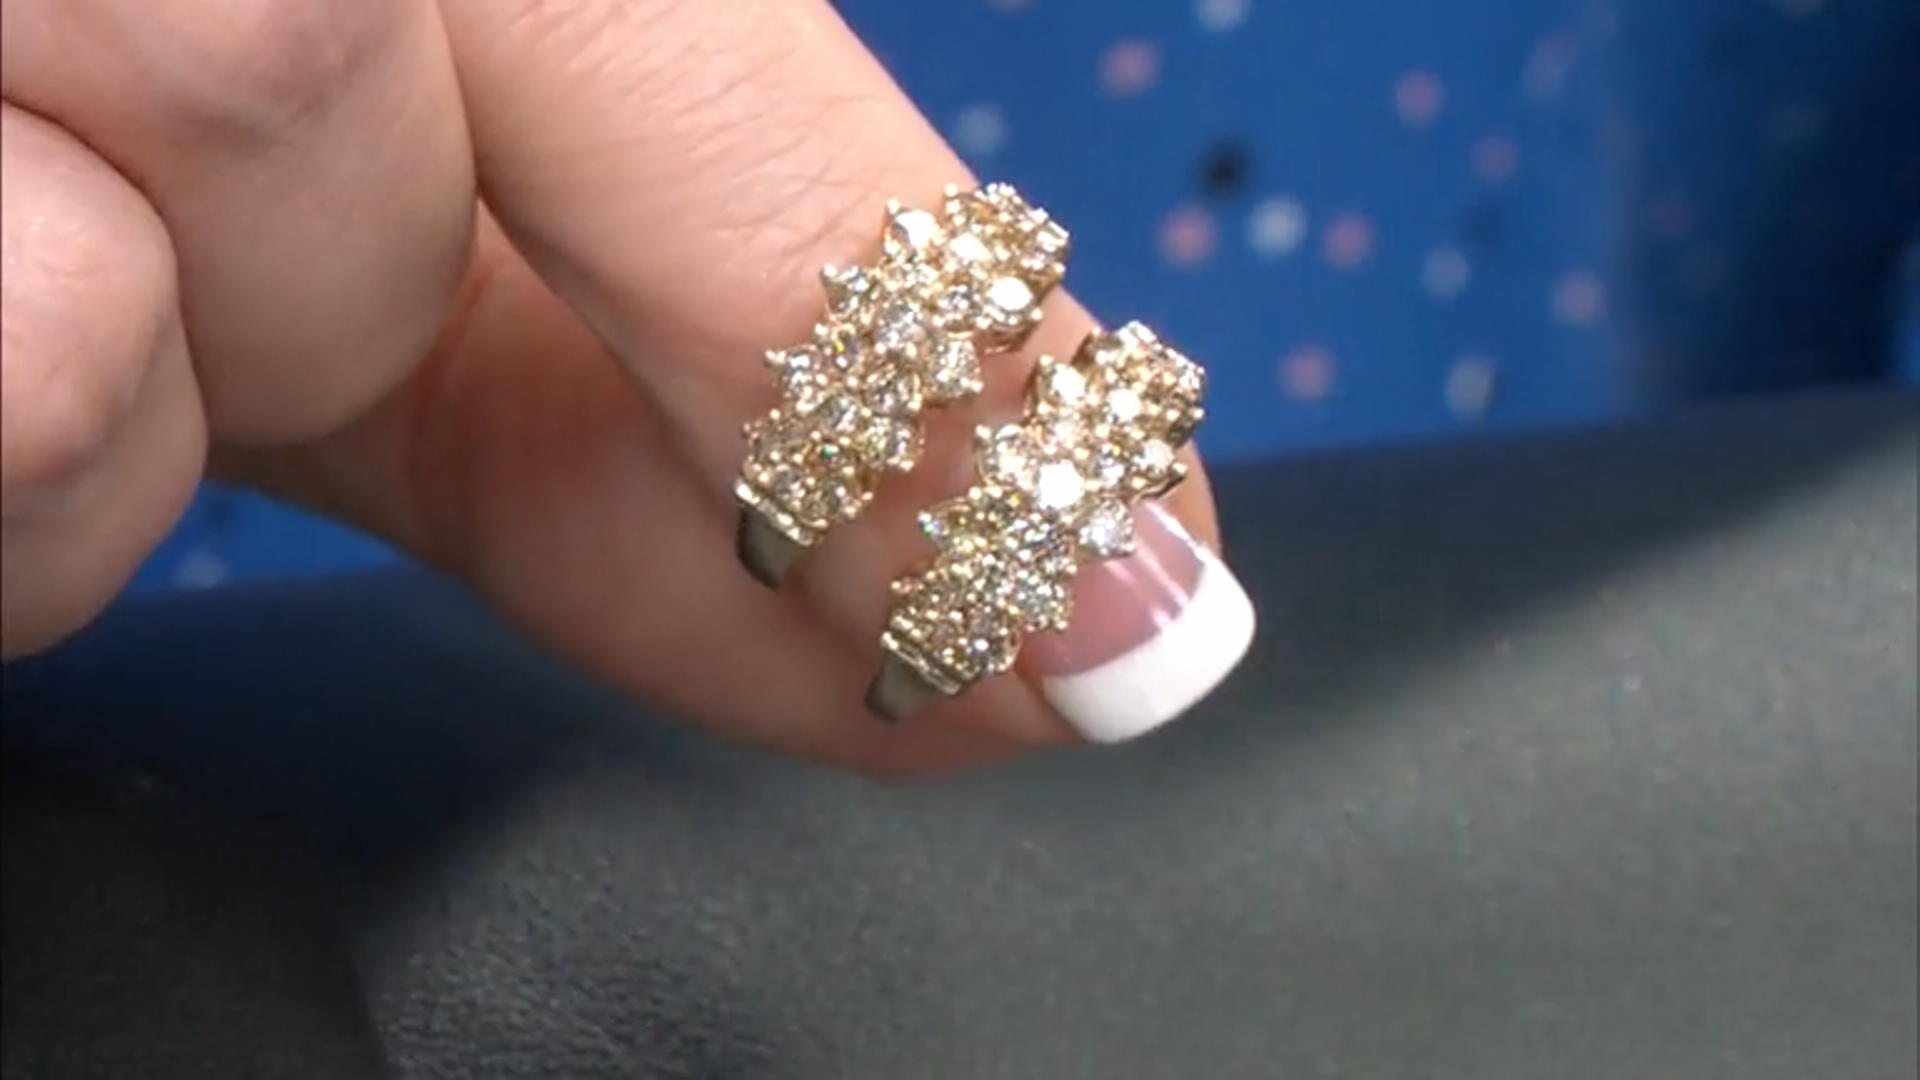 Candlelight Diamonds™ 10k Yellow Gold Cluster Ring 1.00ctw Video Thumbnail